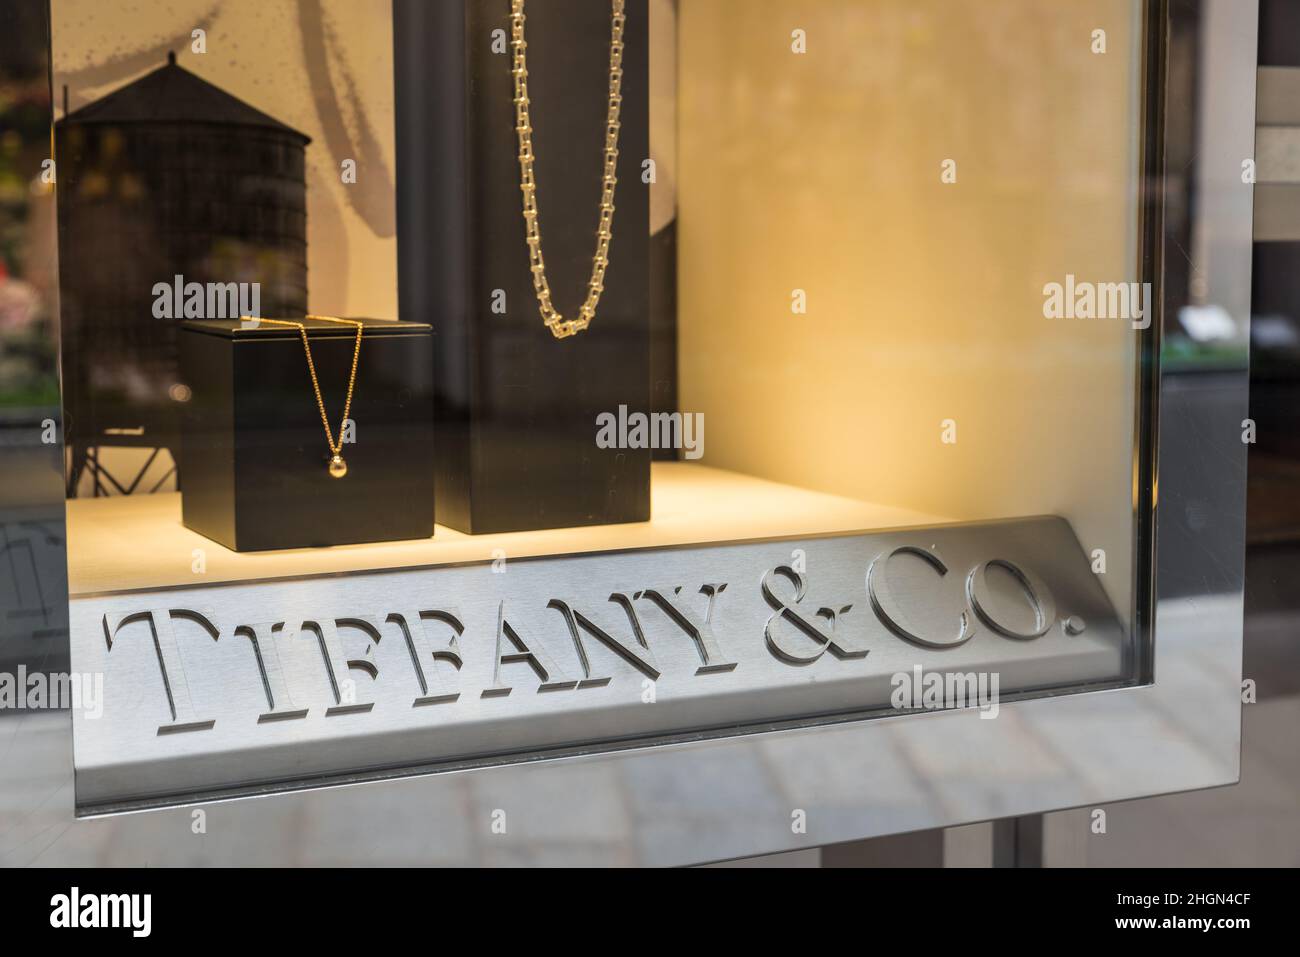 Tiffany & Co (Tiffany's) shop in an exclusive area of Milan city. Symbol and concept of luxury, shopping, quality and made in United States of America Stock Photo